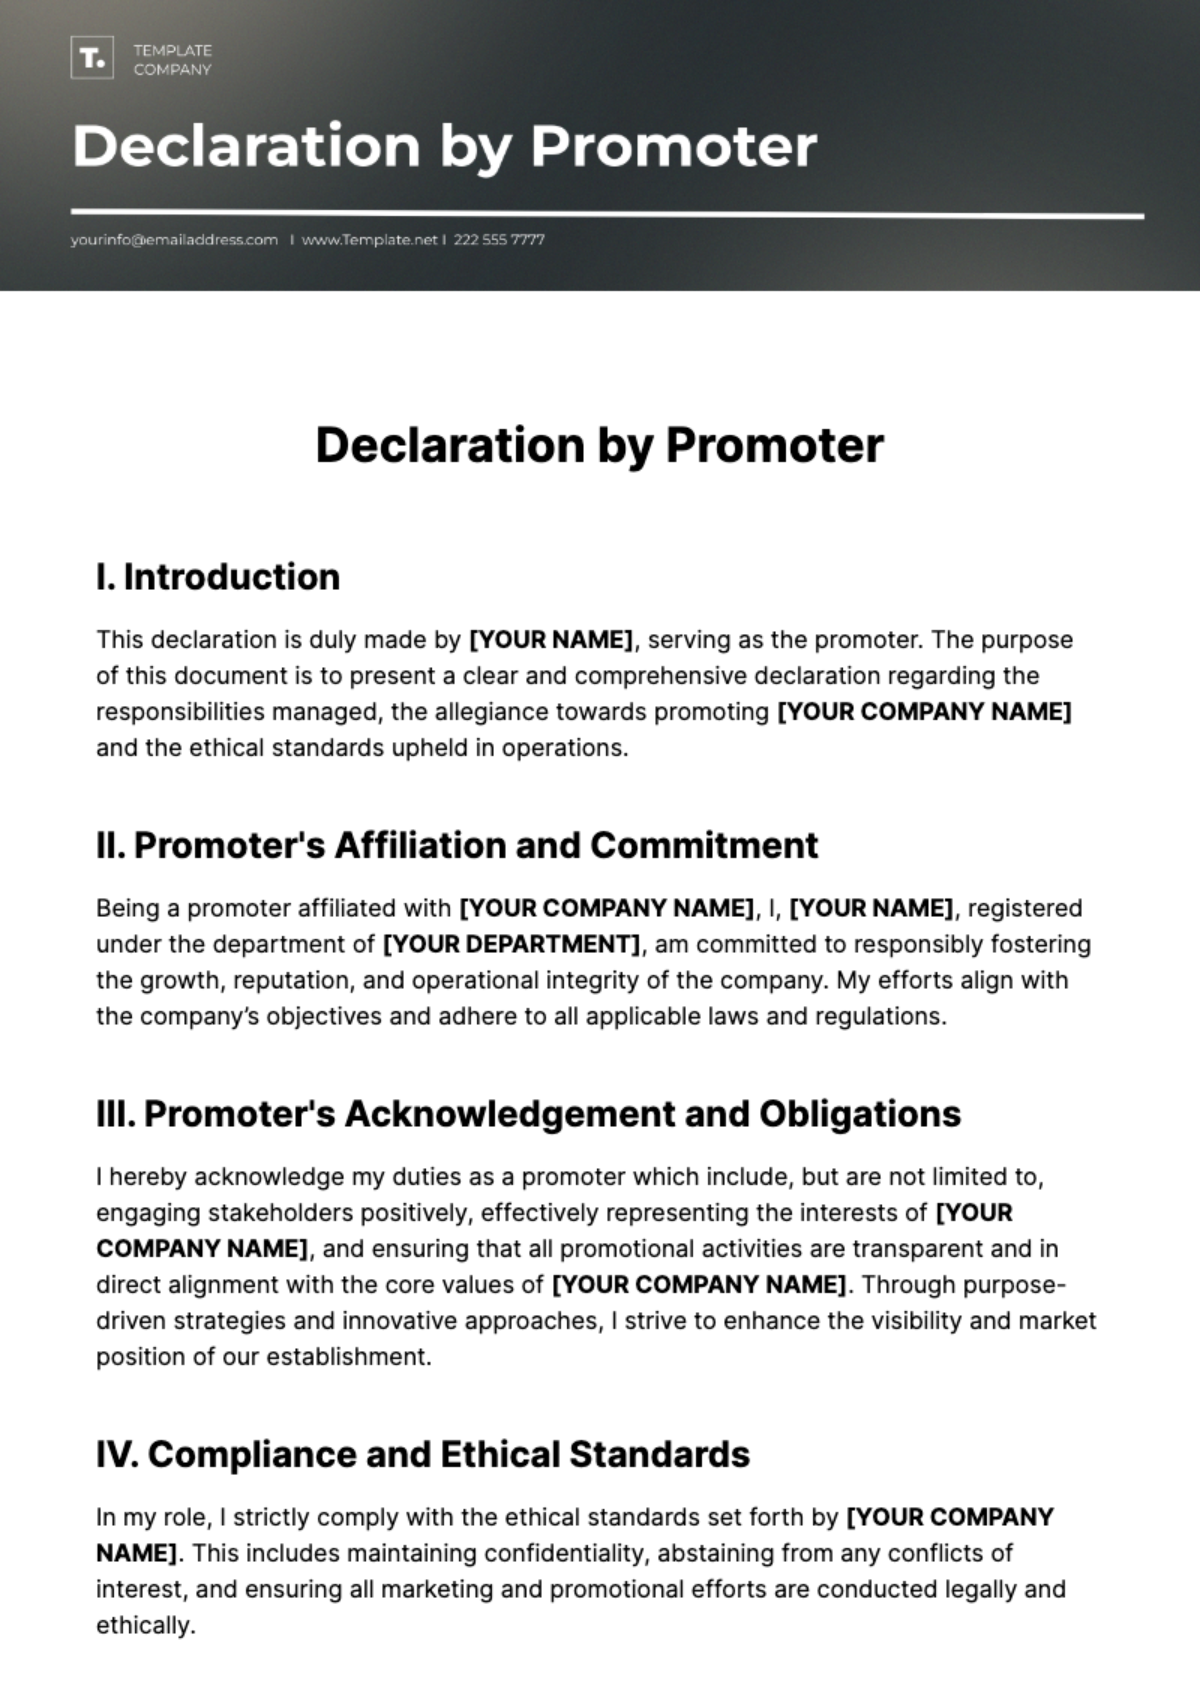 Free Declaration by Promoters Template